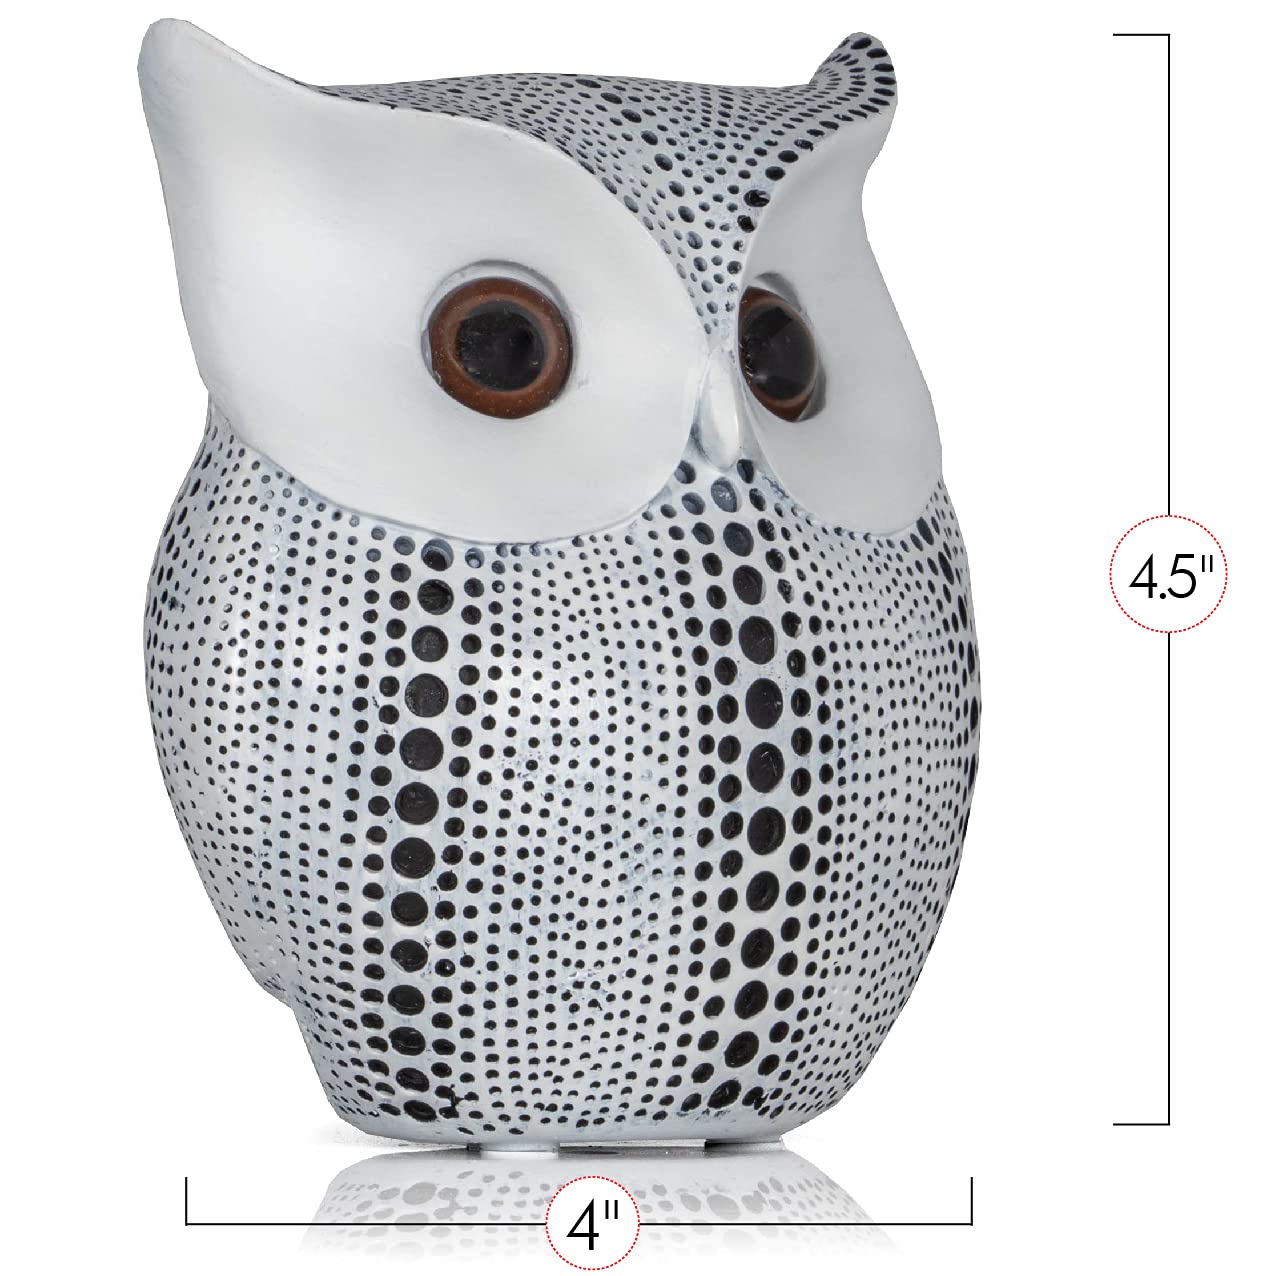 Ornativity White Owl Statue Figurine - Animal Sculpture Home Decoration for Bedroom Living Room Kitchen Office Bathroom House Decor Figurines